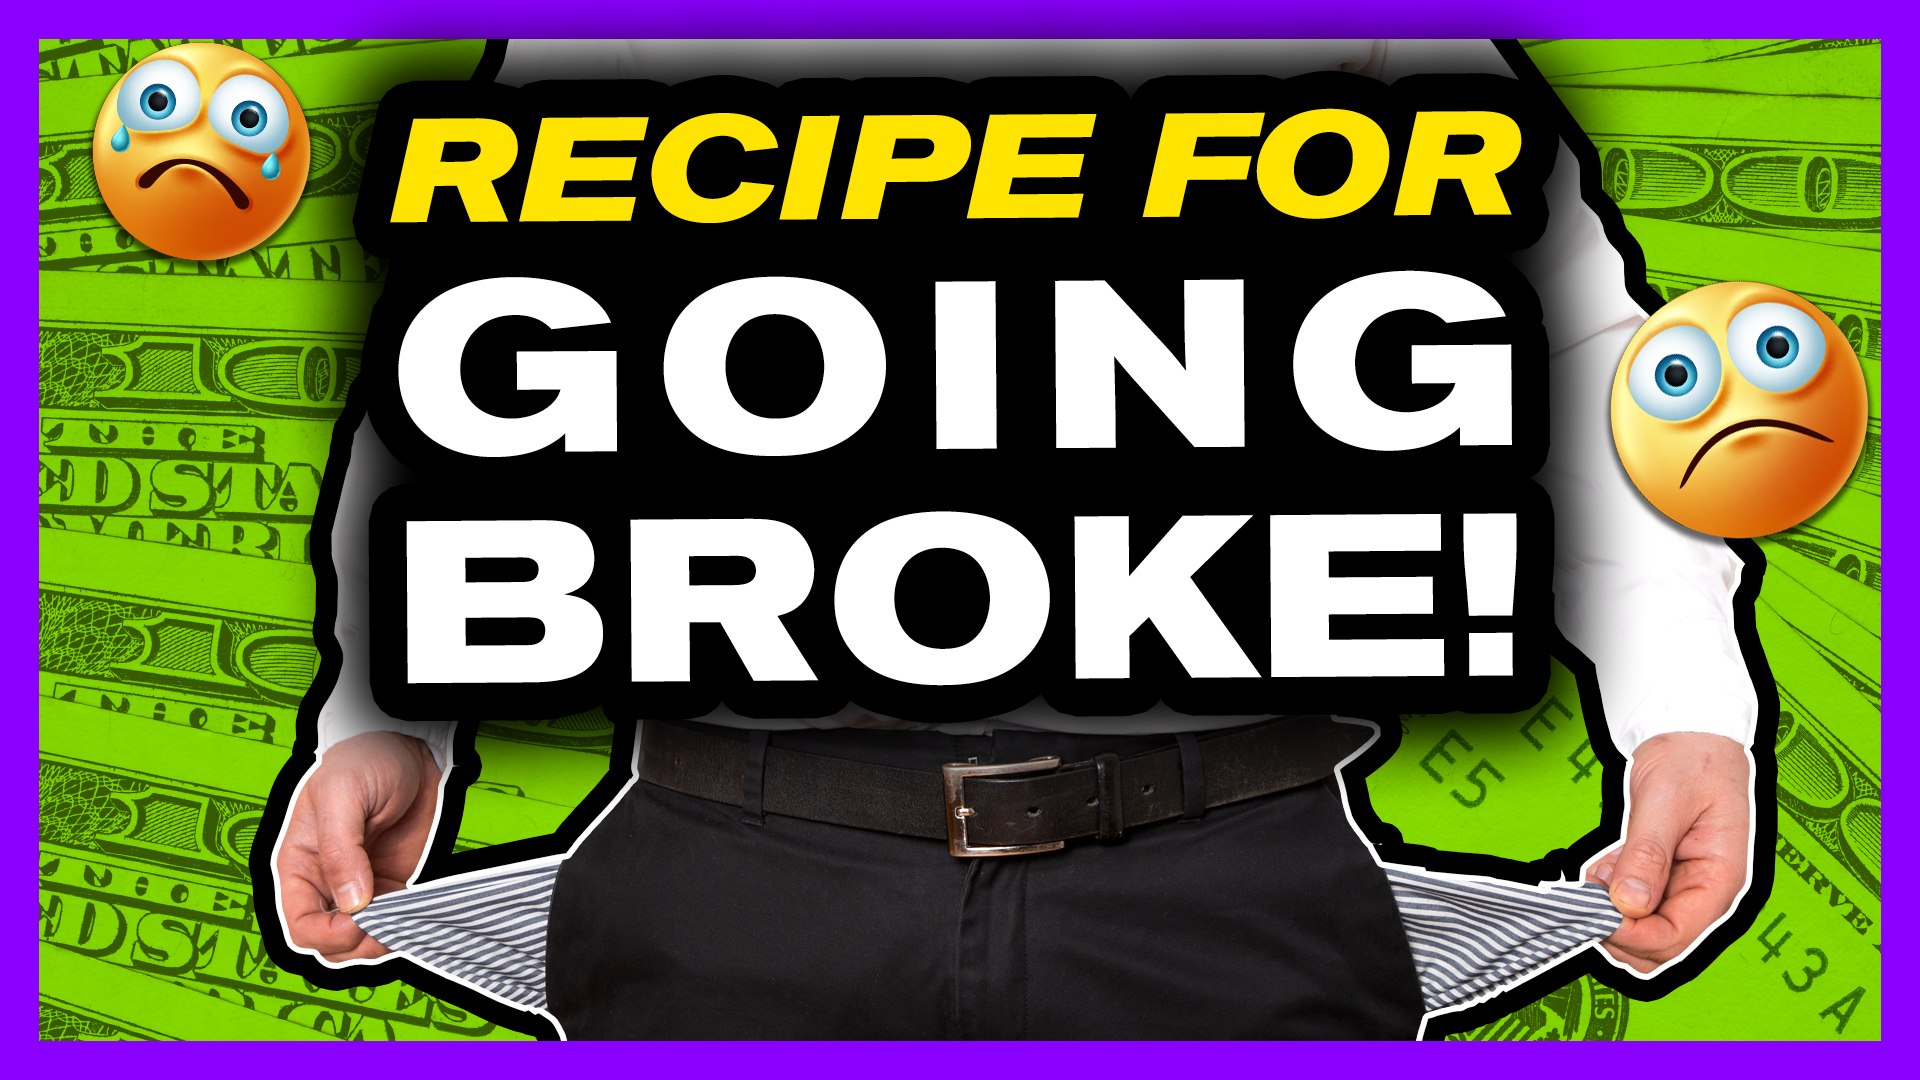 The Recipe for Going Broke